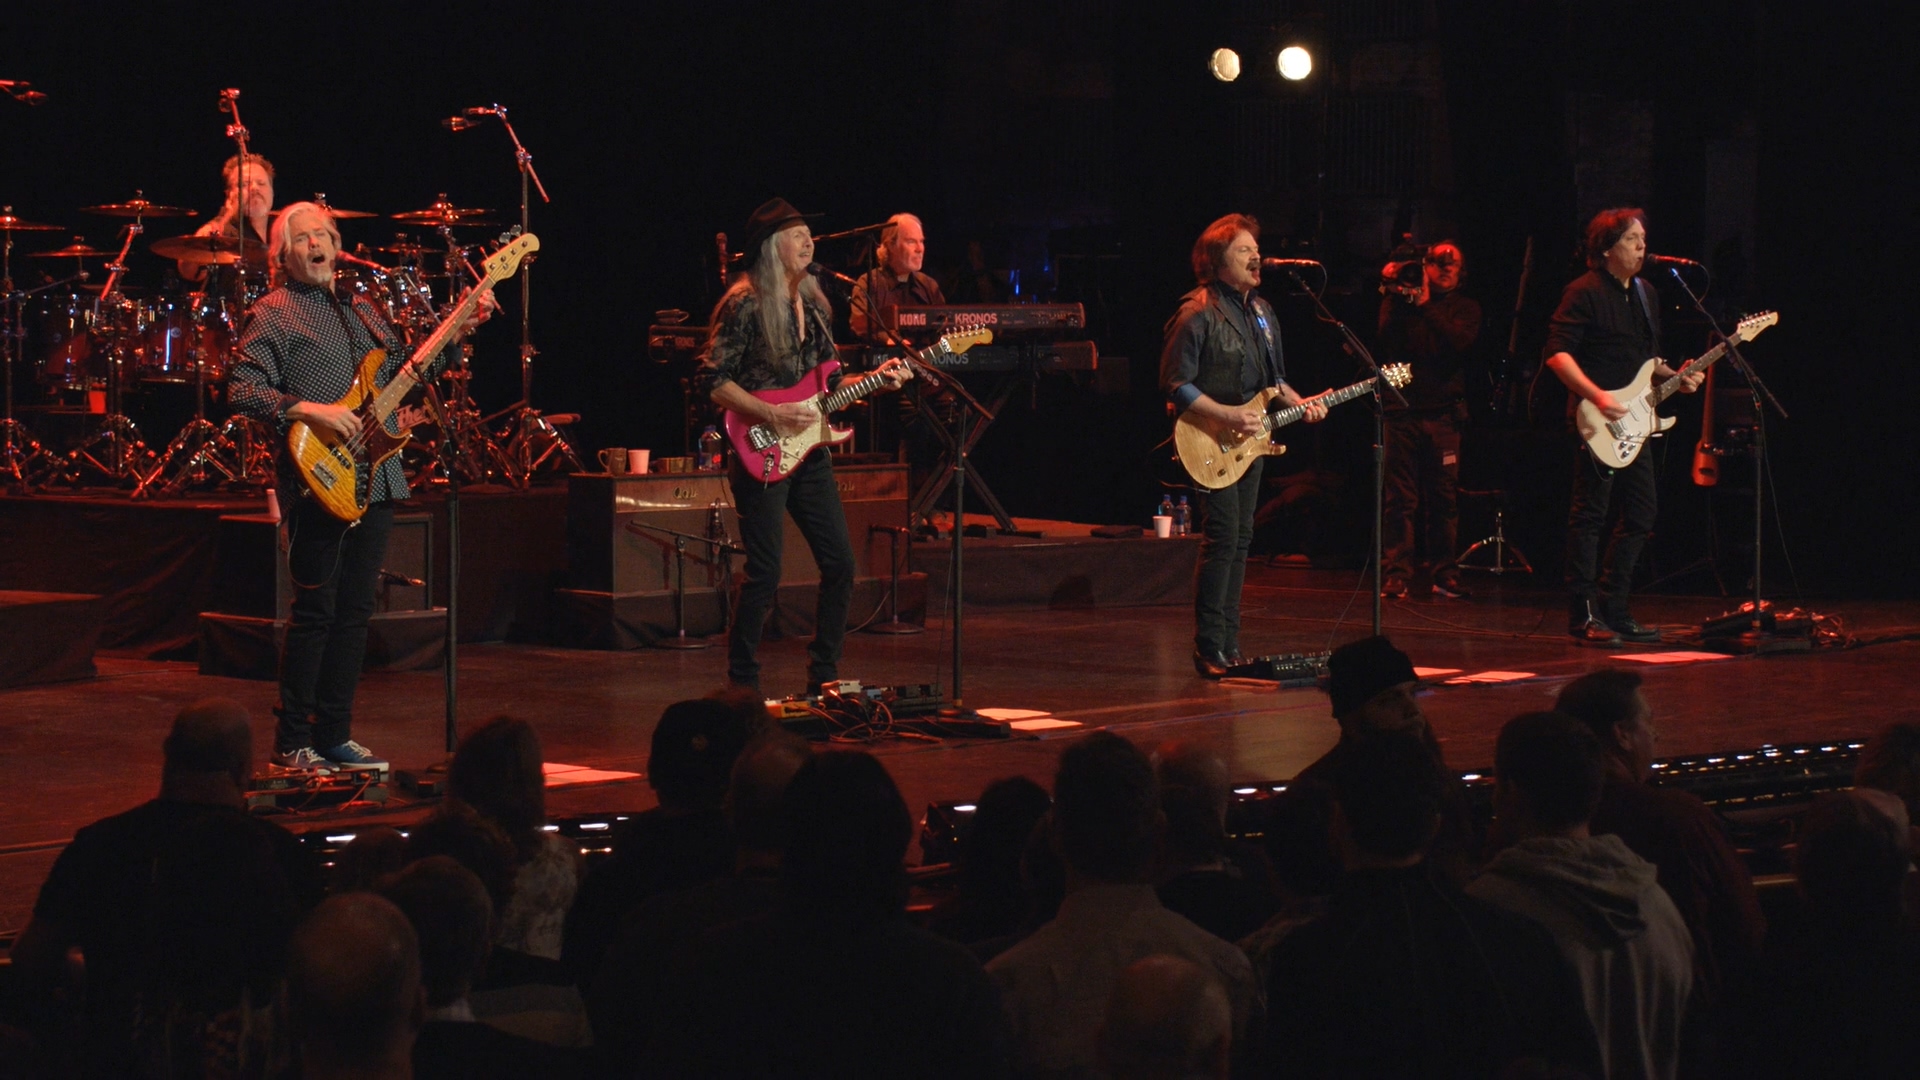 The Doobie Brothers Live From The Beacon Theatre Bluray 1080p DTS-HD MA 5.1_20190702_181109.850.jpg